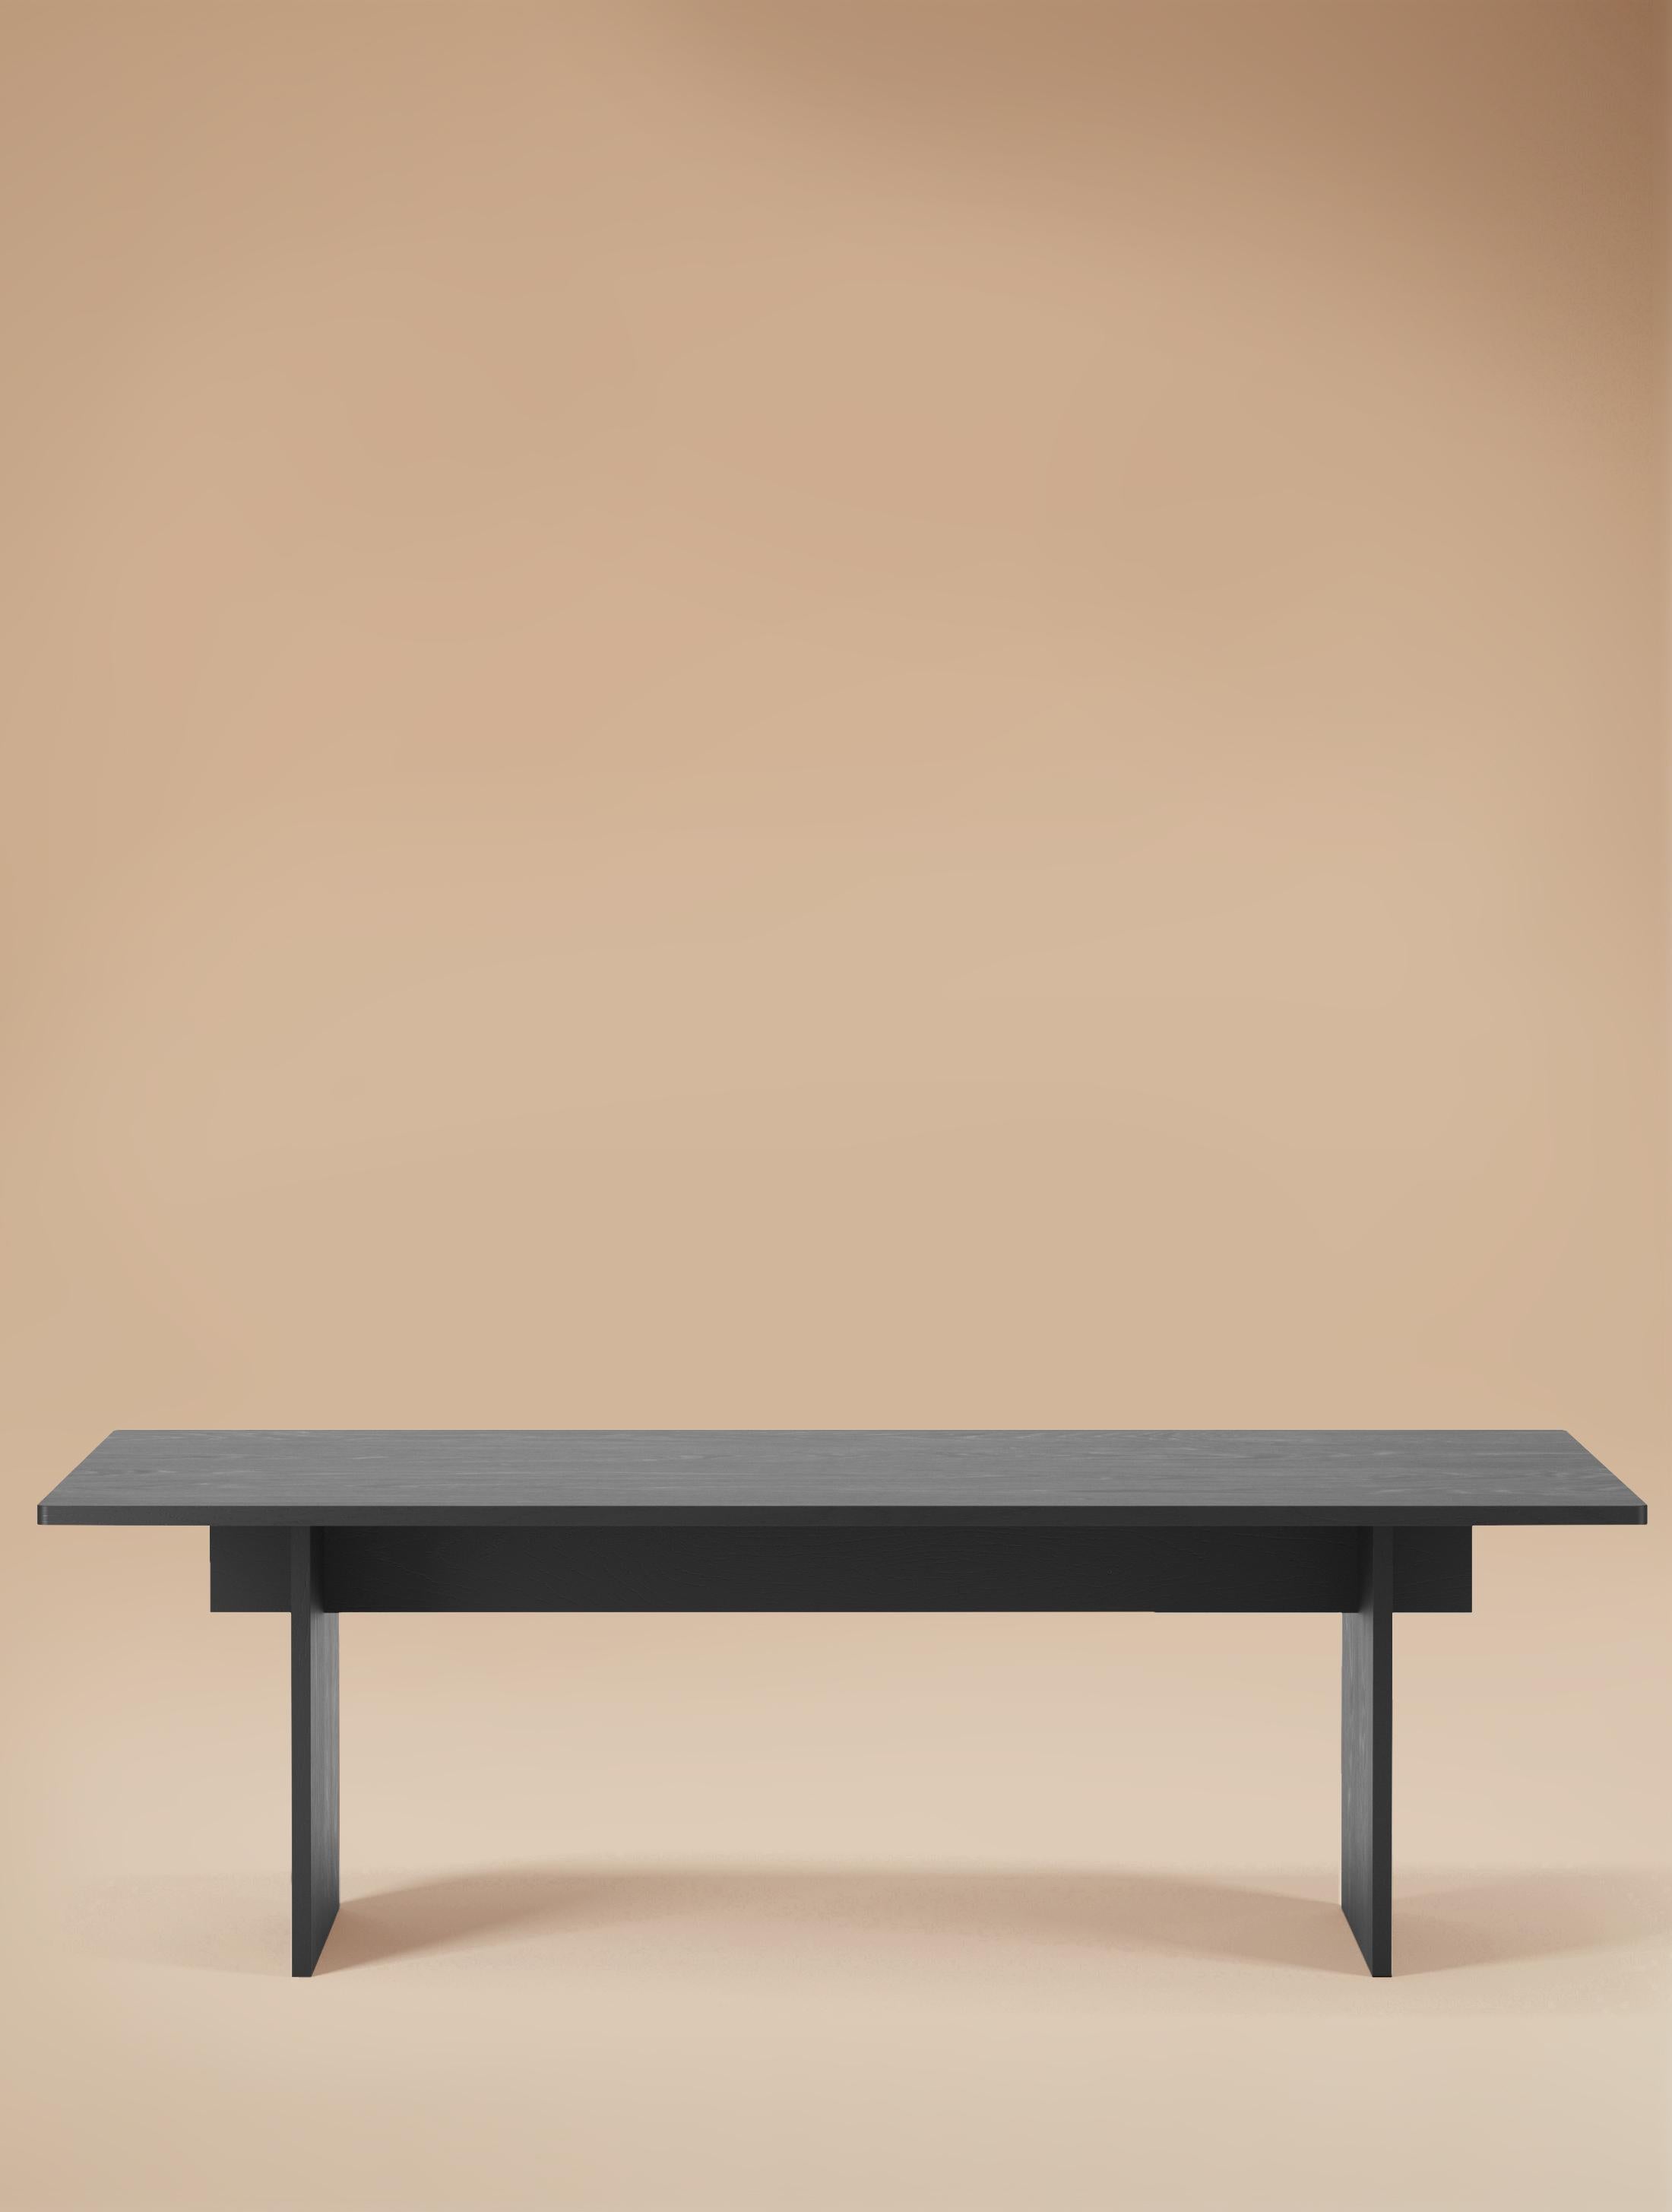 8 Seater Faure Table Handcrafted in Charcoal Oiled Oak by Kevin Frankental  12